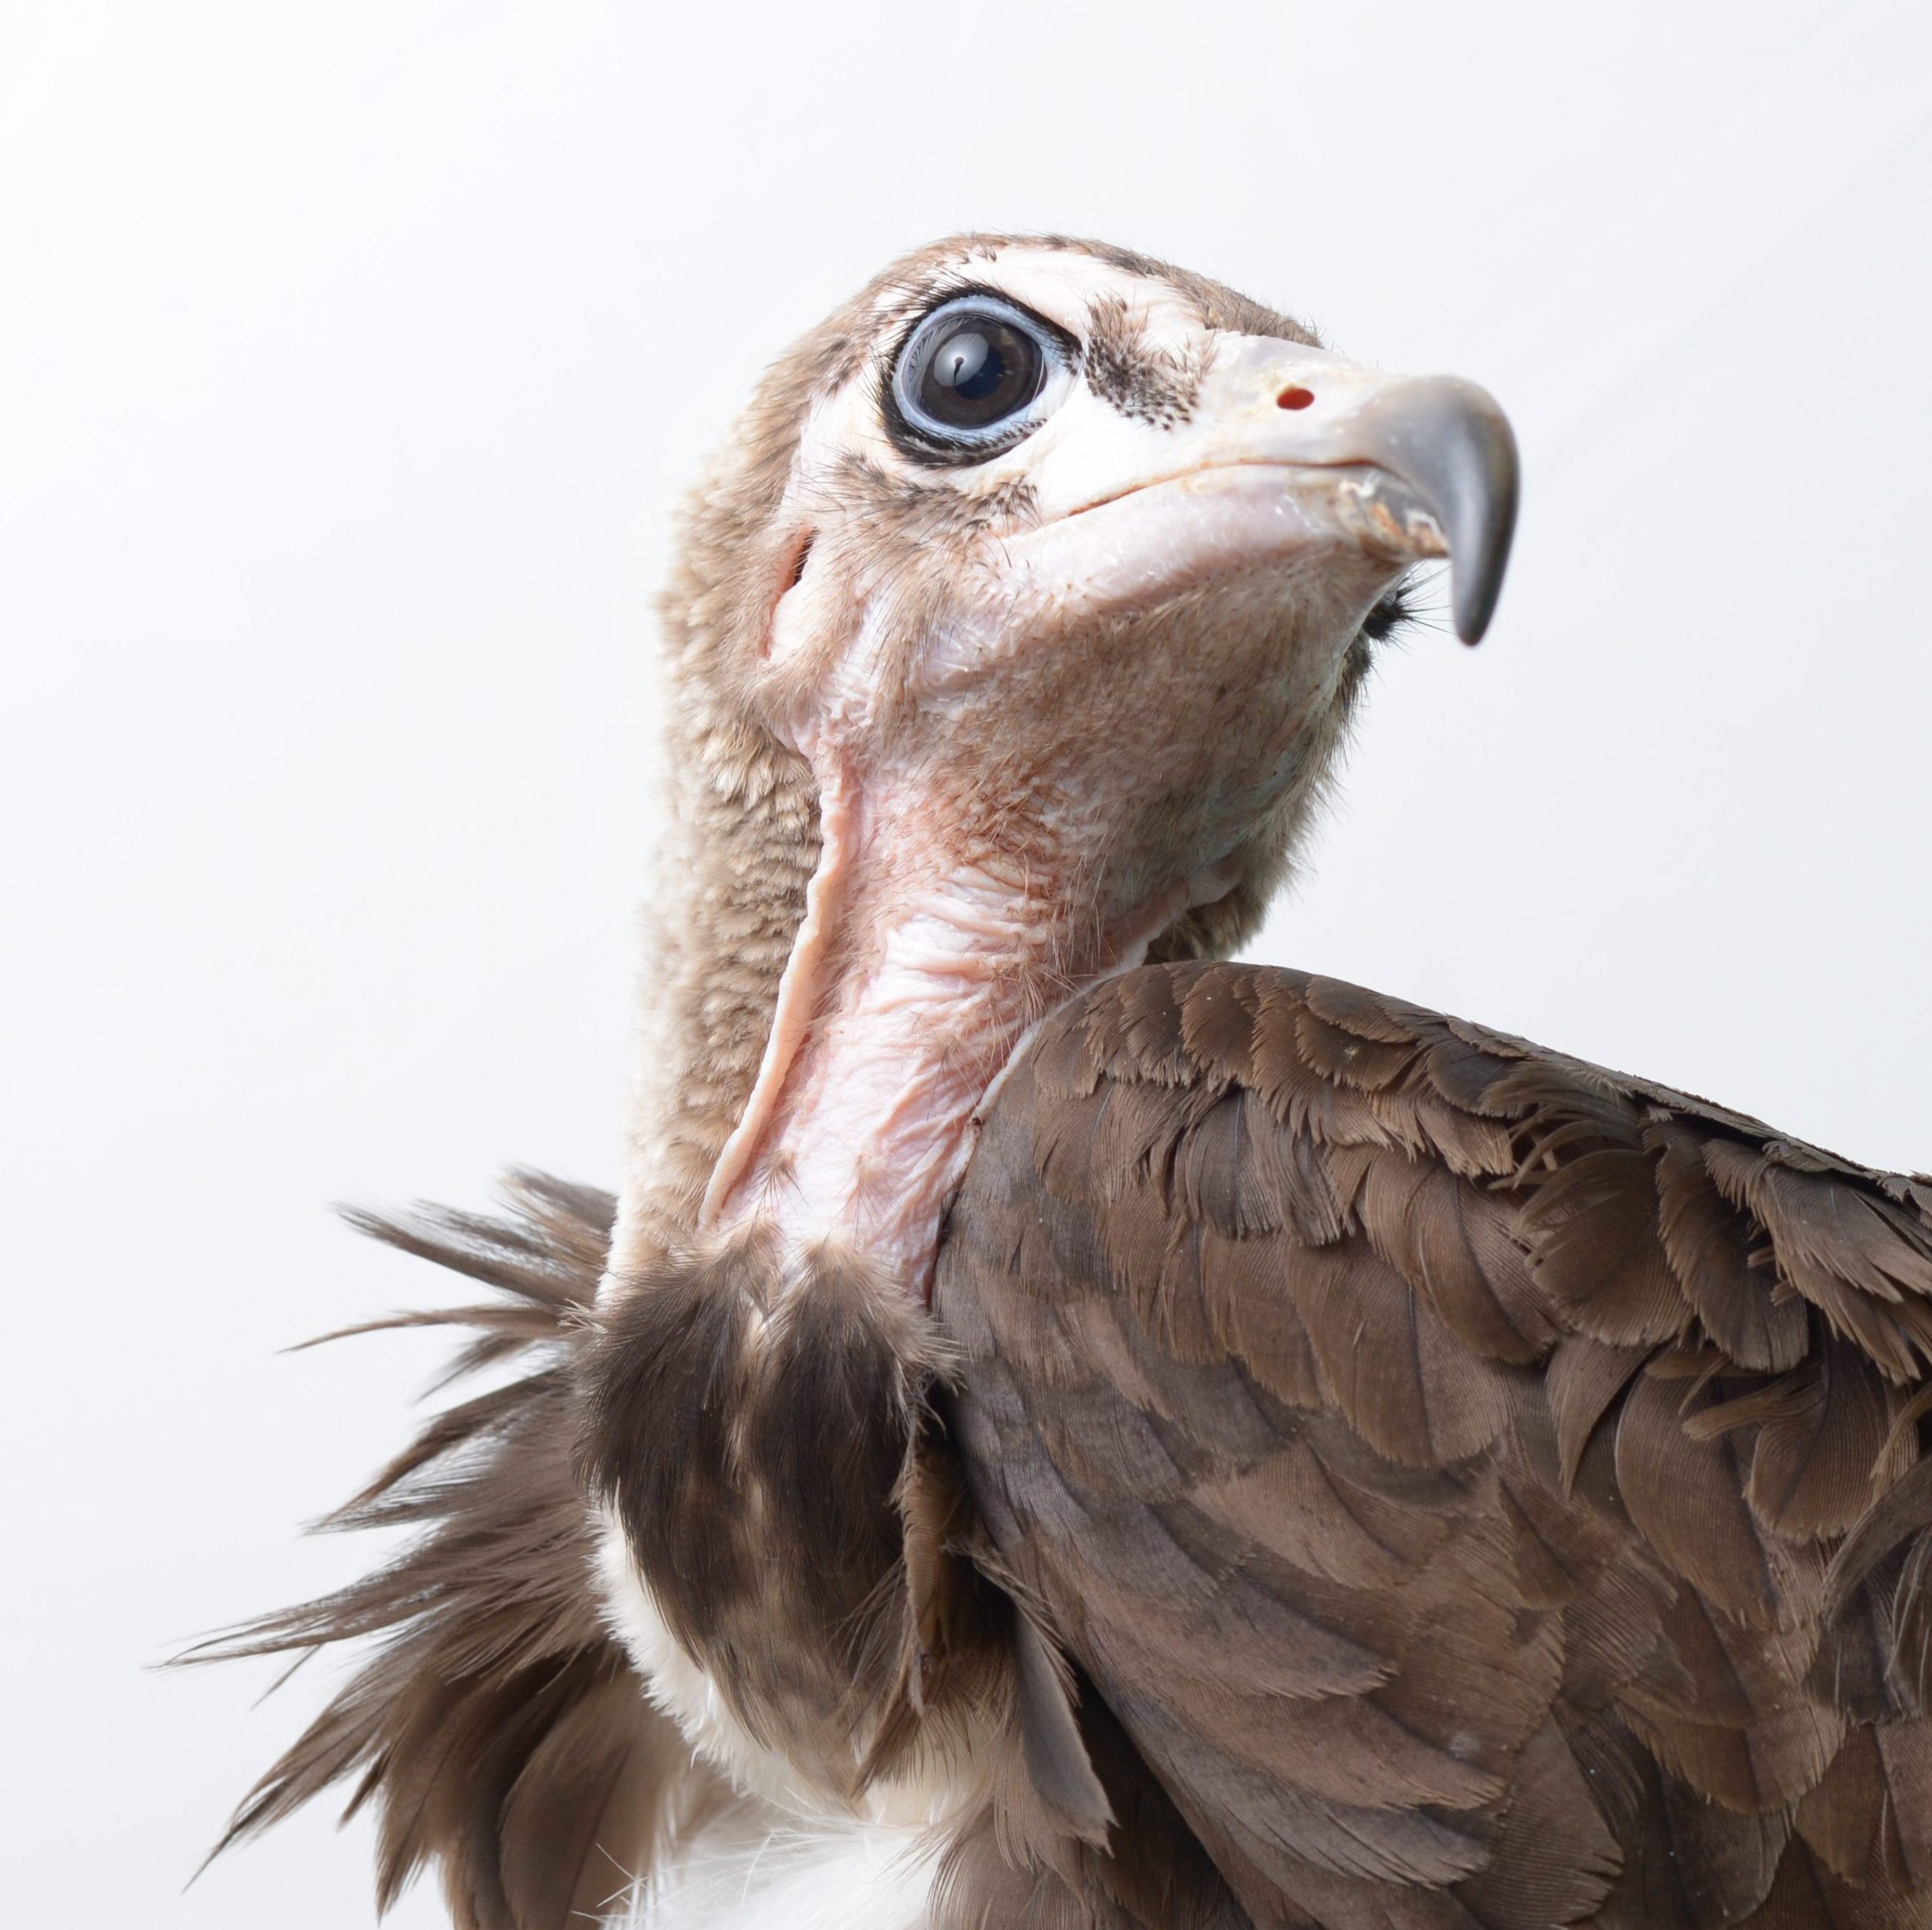 A Hooded Vulture